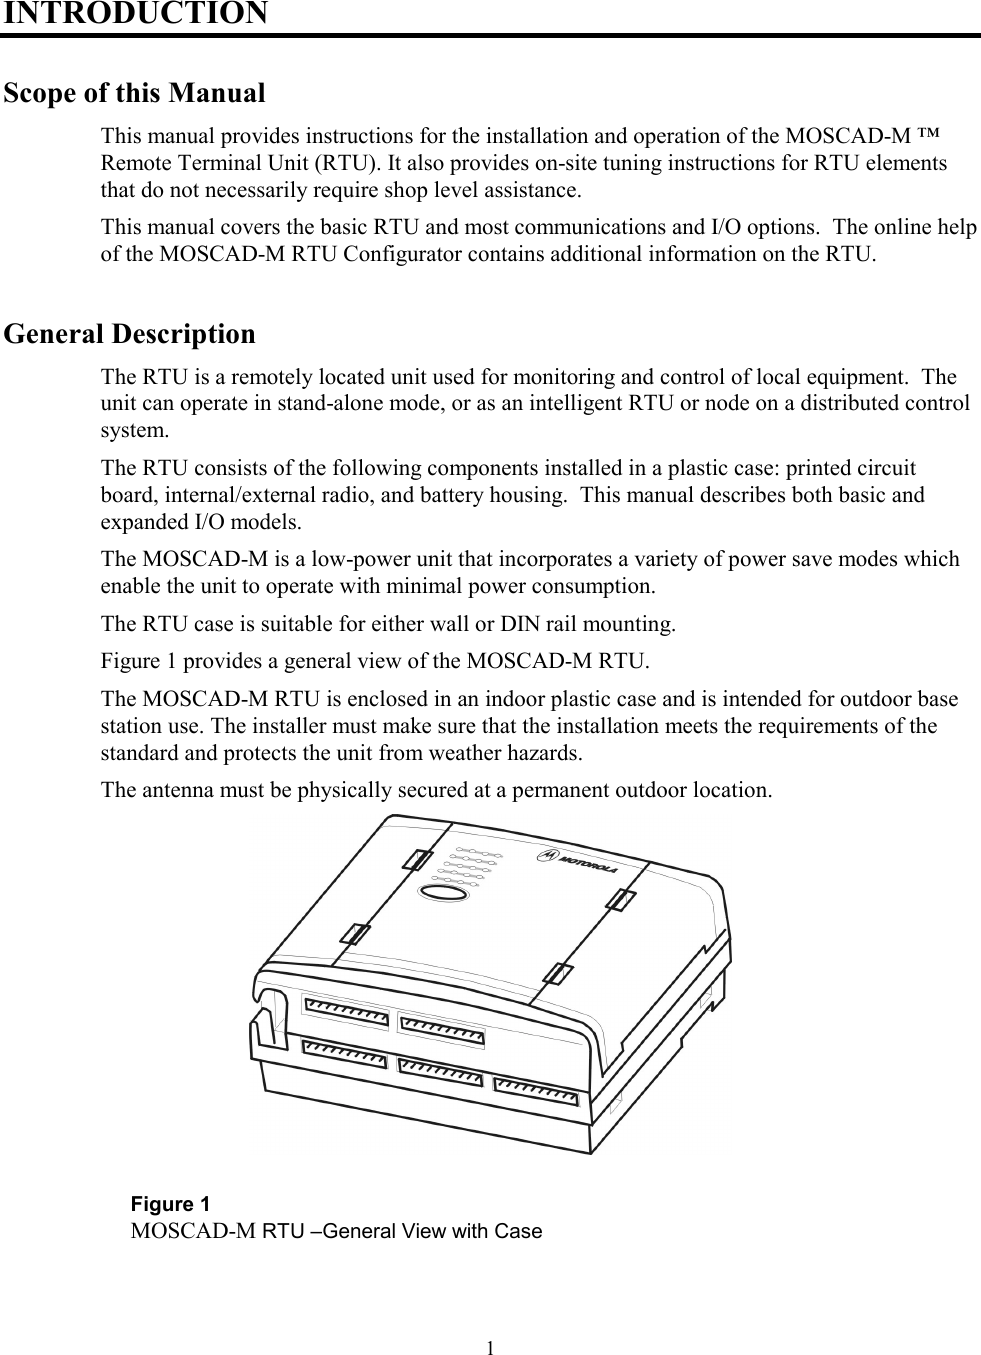 1INTRODUCTIONScope of this ManualThis manual provides instructions for the installation and operation of the MOSCAD-M ™Remote Terminal Unit (RTU). It also provides on-site tuning instructions for RTU elementsthat do not necessarily require shop level assistance.This manual covers the basic RTU and most communications and I/O options.  The online helpof the MOSCAD-M RTU Configurator contains additional information on the RTU.General DescriptionThe RTU is a remotely located unit used for monitoring and control of local equipment.  Theunit can operate in stand-alone mode, or as an intelligent RTU or node on a distributed controlsystem.The RTU consists of the following components installed in a plastic case: printed circuitboard, internal/external radio, and battery housing.  This manual describes both basic andexpanded I/O models.The MOSCAD-M is a low-power unit that incorporates a variety of power save modes whichenable the unit to operate with minimal power consumption.The RTU case is suitable for either wall or DIN rail mounting.Figure 1 provides a general view of the MOSCAD-M RTU.The MOSCAD-M RTU is enclosed in an indoor plastic case and is intended for outdoor basestation use. The installer must make sure that the installation meets the requirements of thestandard and protects the unit from weather hazards.The antenna must be physically secured at a permanent outdoor location.Figure 1MOSCAD-M RTU –General View with Case